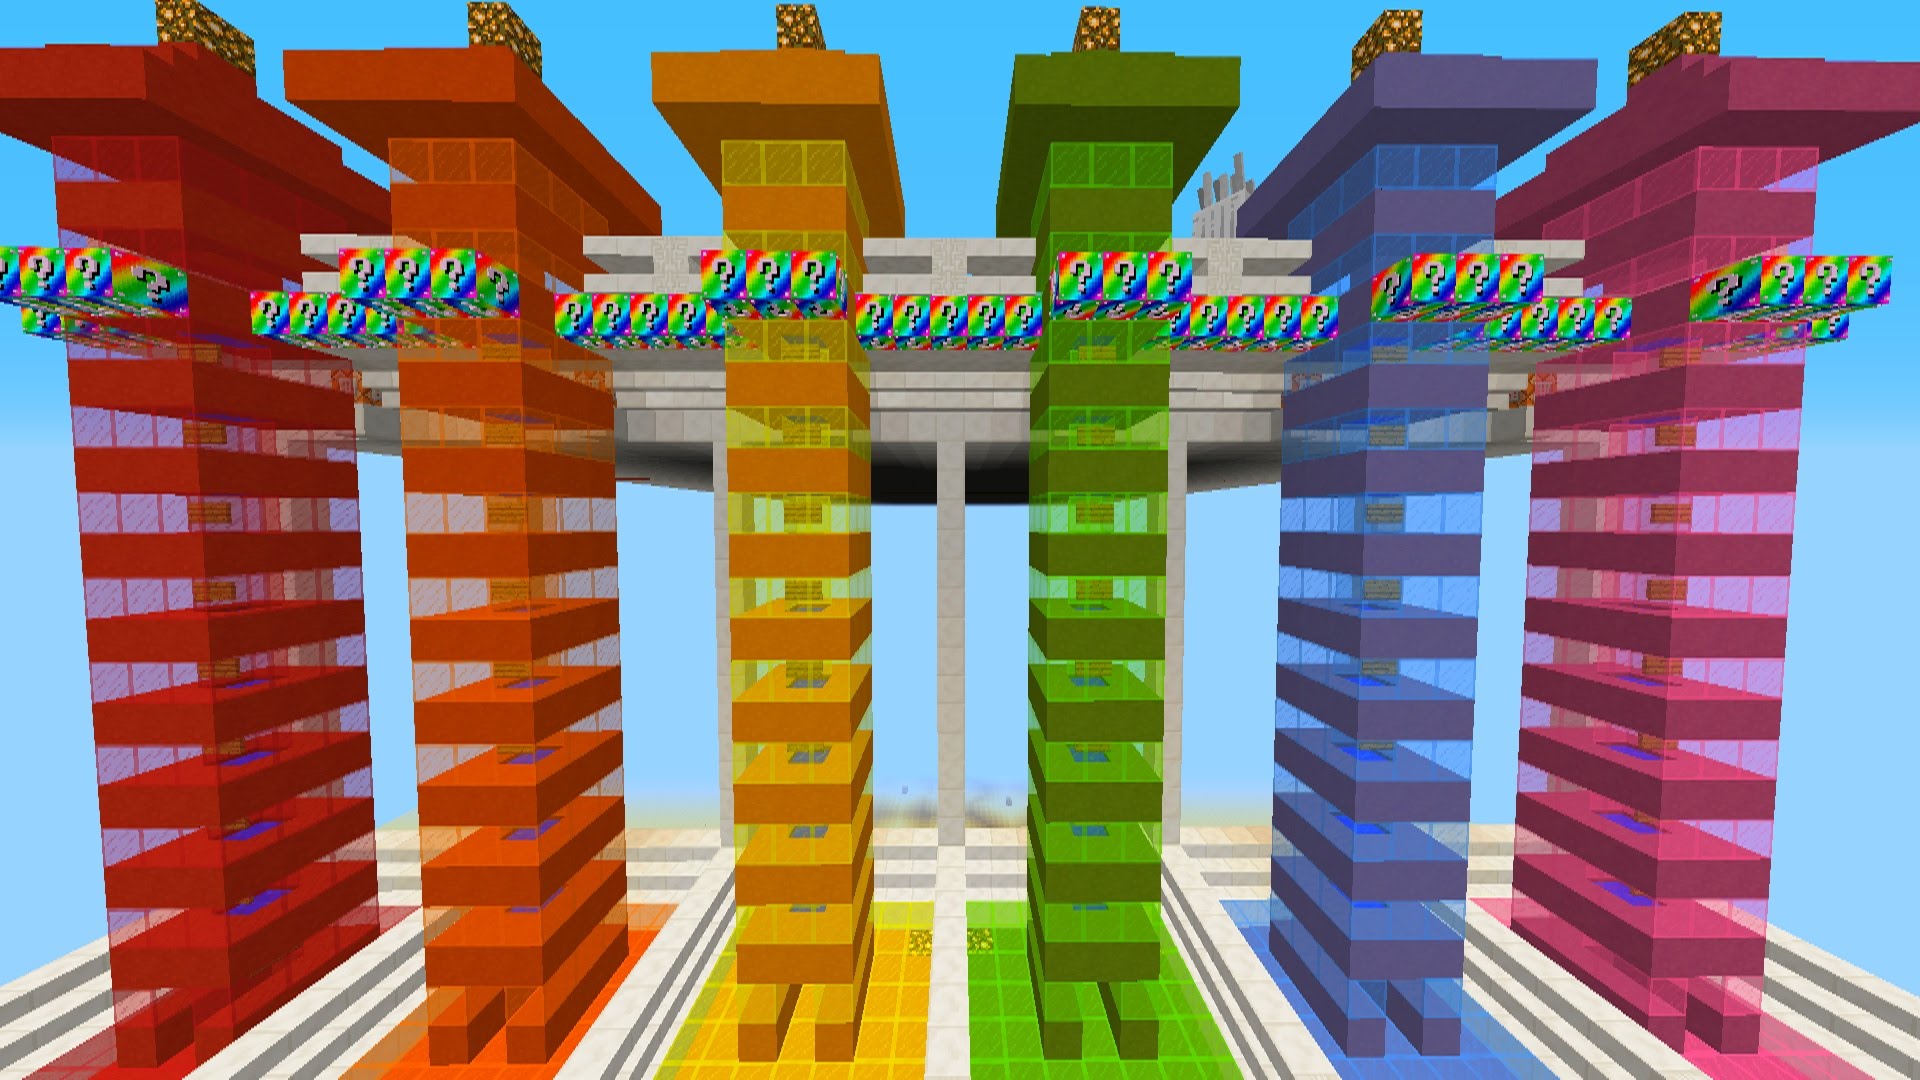 Minecraft: ULTIMATE RAINBOW LUCKY BLOCK MOD (FLOATING STRUCTURES, BIG  STATUES, & TRAPS) Mod Showcase 